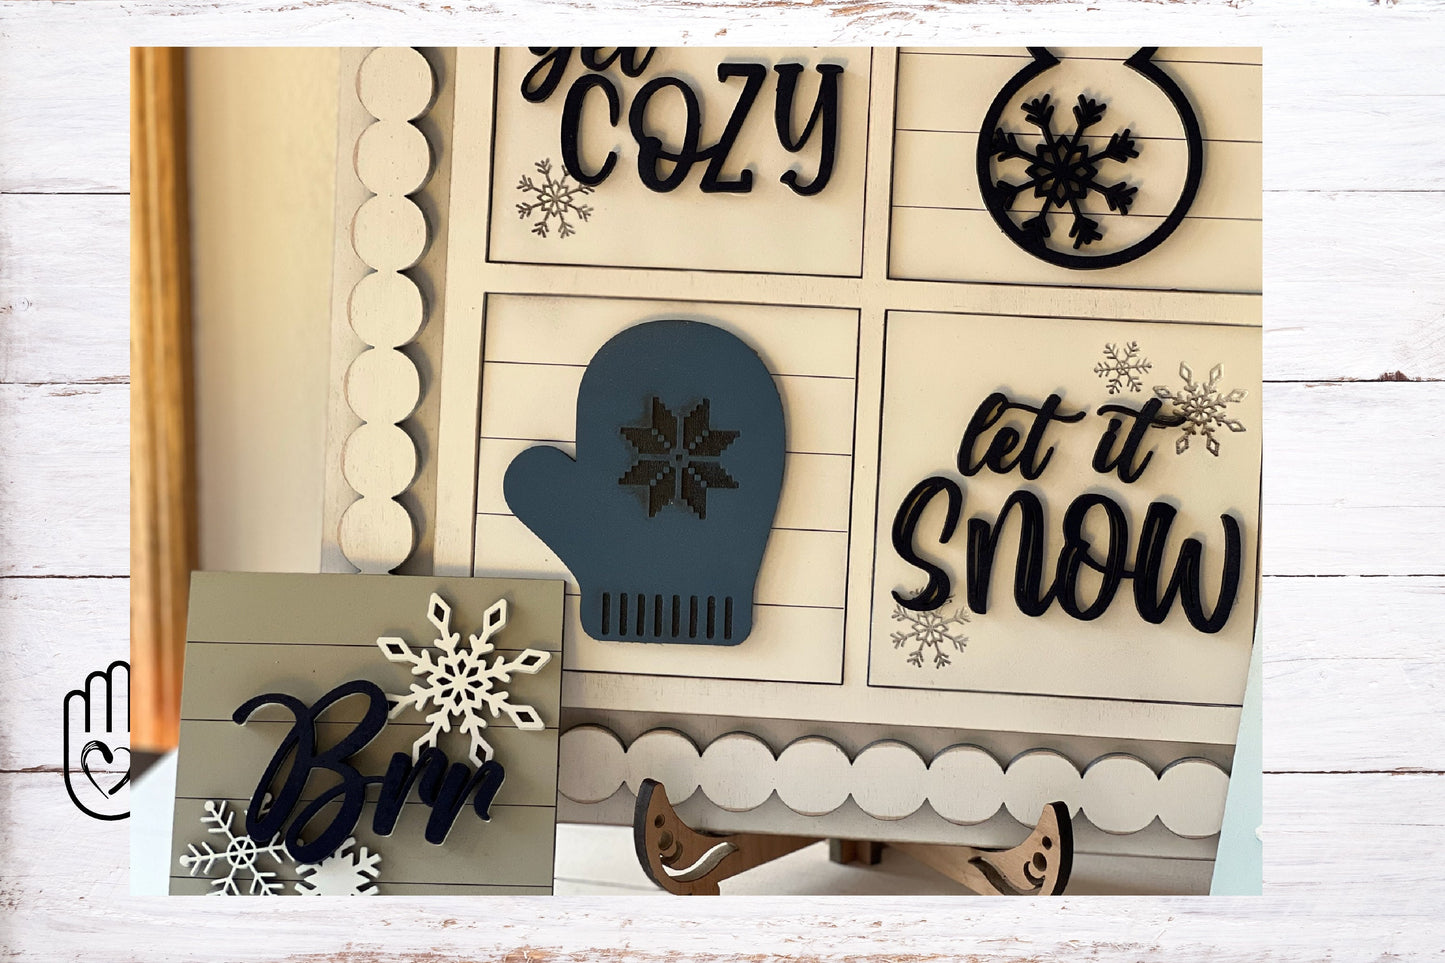 Winter Snow Leaning Ladder Interchangeable Signs - Laser Cut Wood Painted